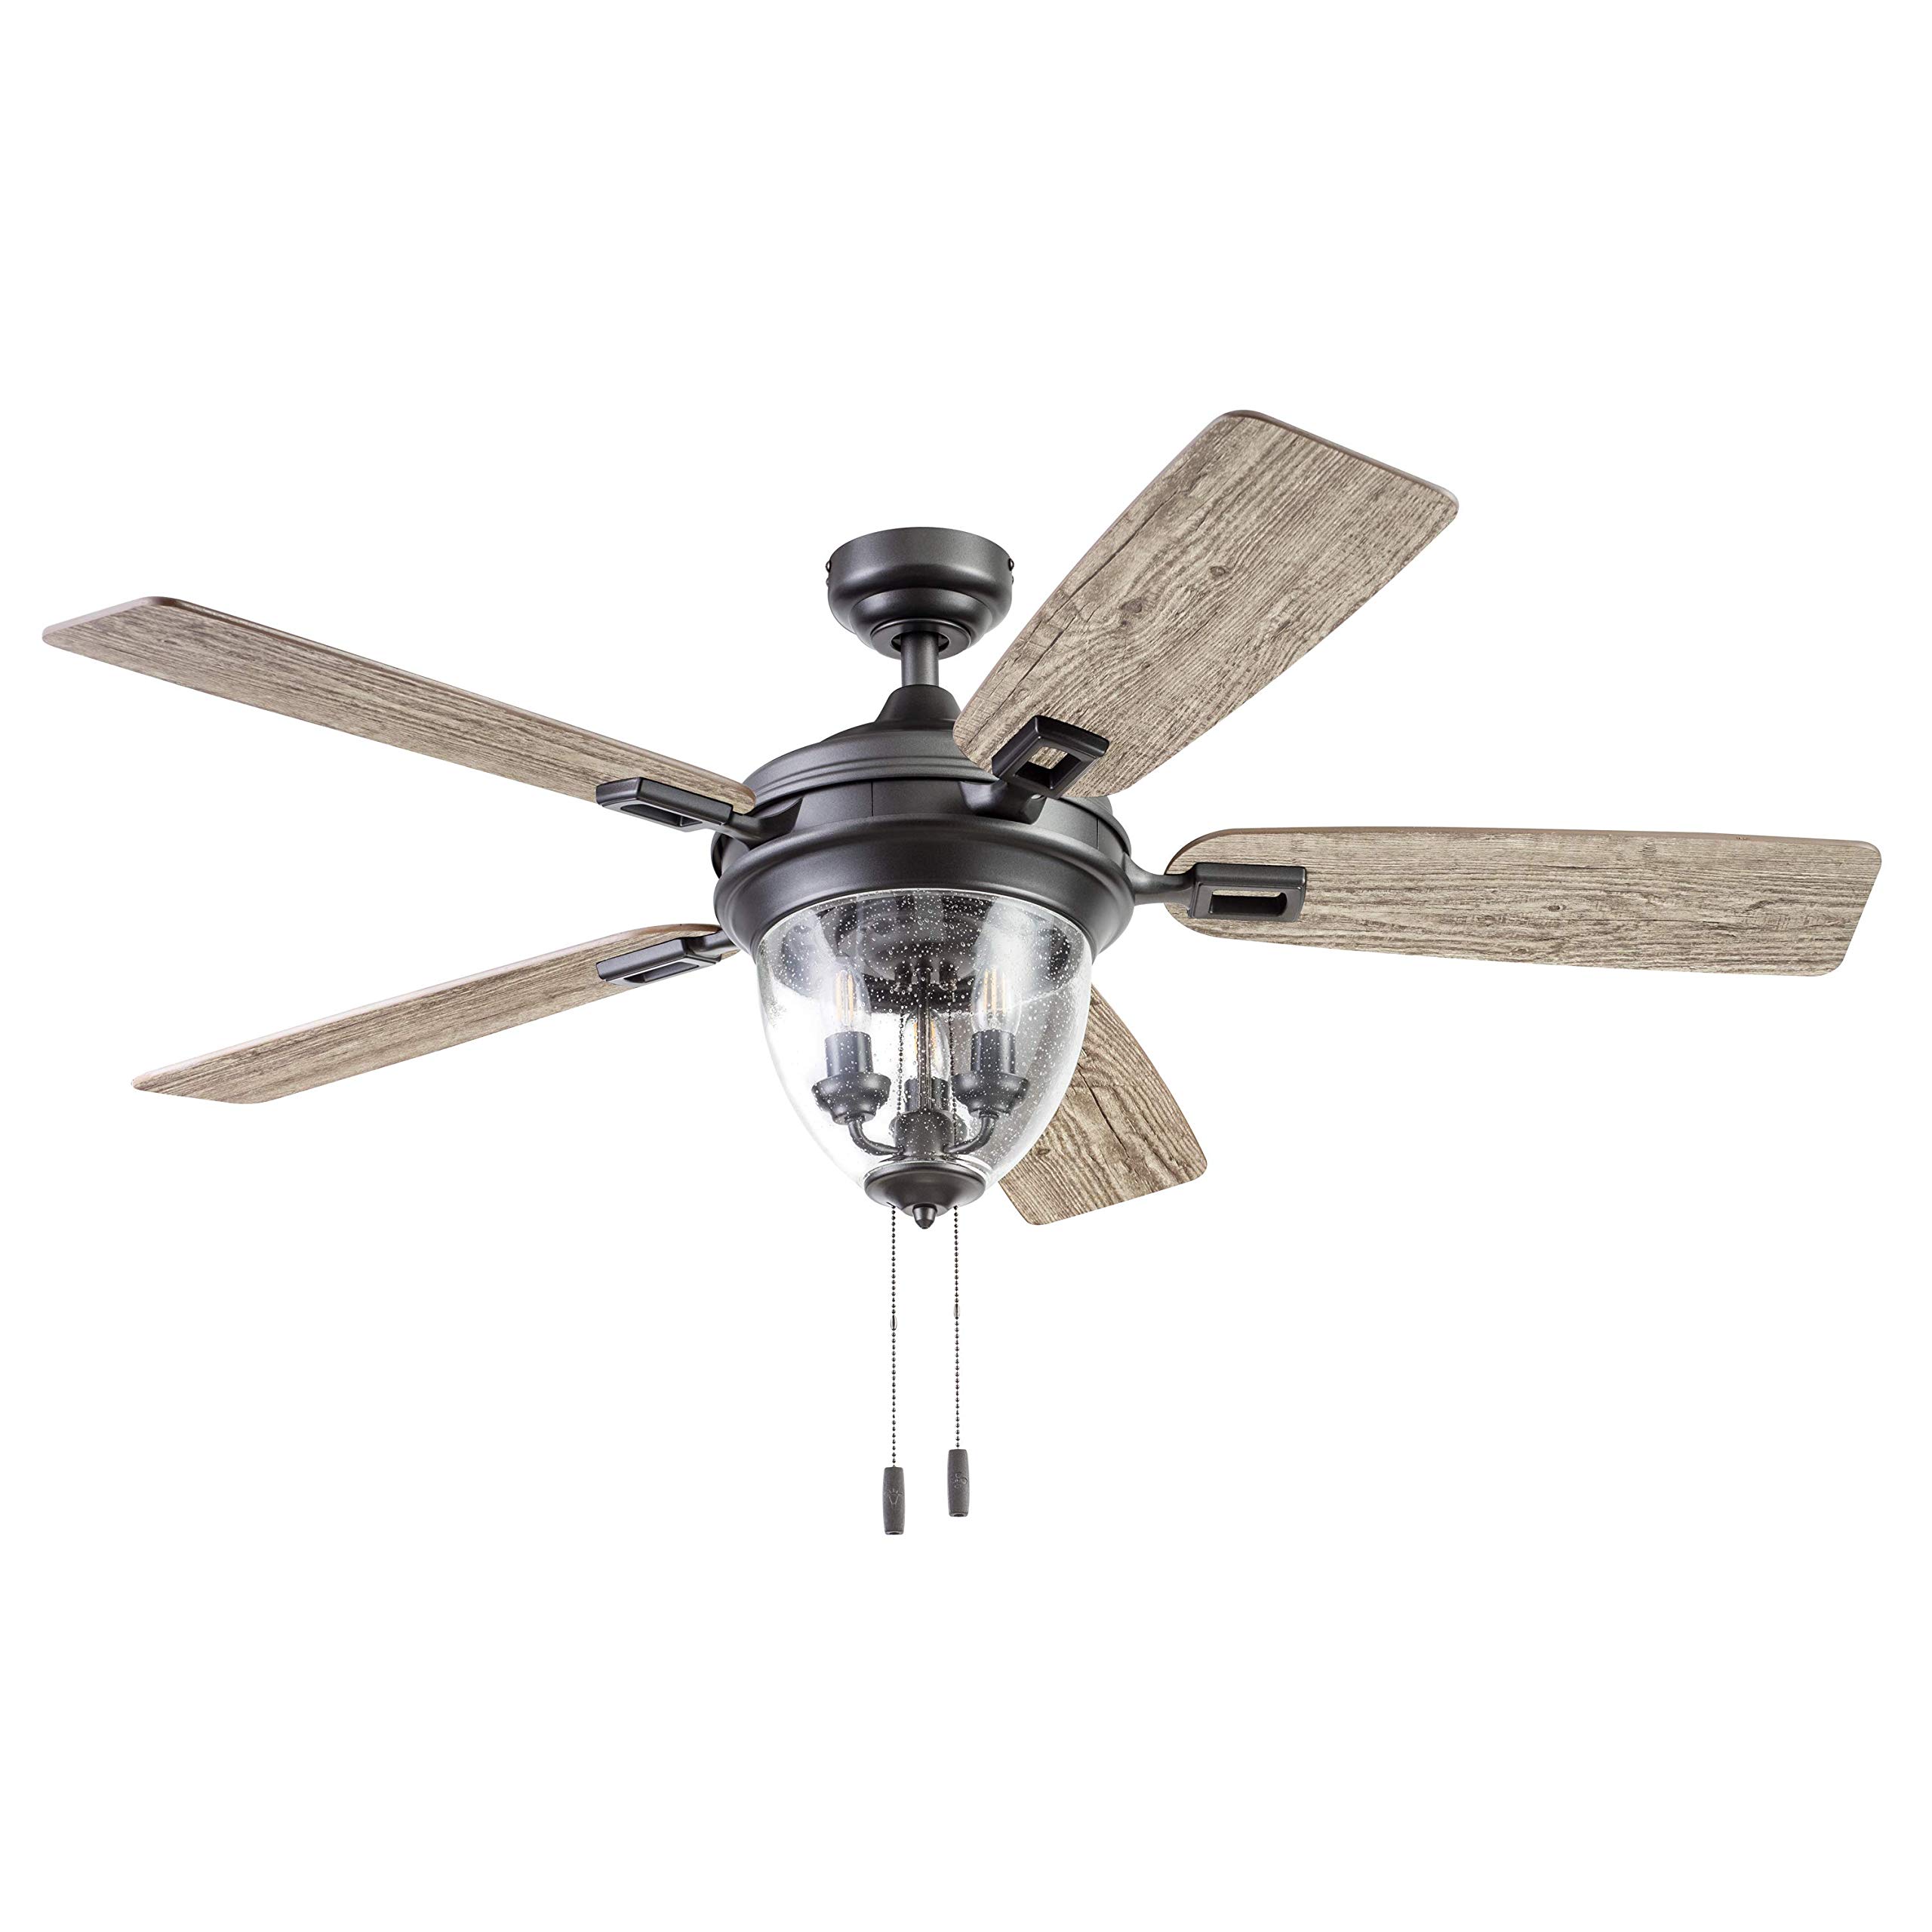 Honeywell Ceiling Fans Glencrest, 52 Inch Indoor Outdoor LED Ceiling Fan with Light, Pull Chain, Dual Mounting Options, ETL Damp Rated, Dual Finish Blades, Reversible Motor - 50615-01 (Iron)